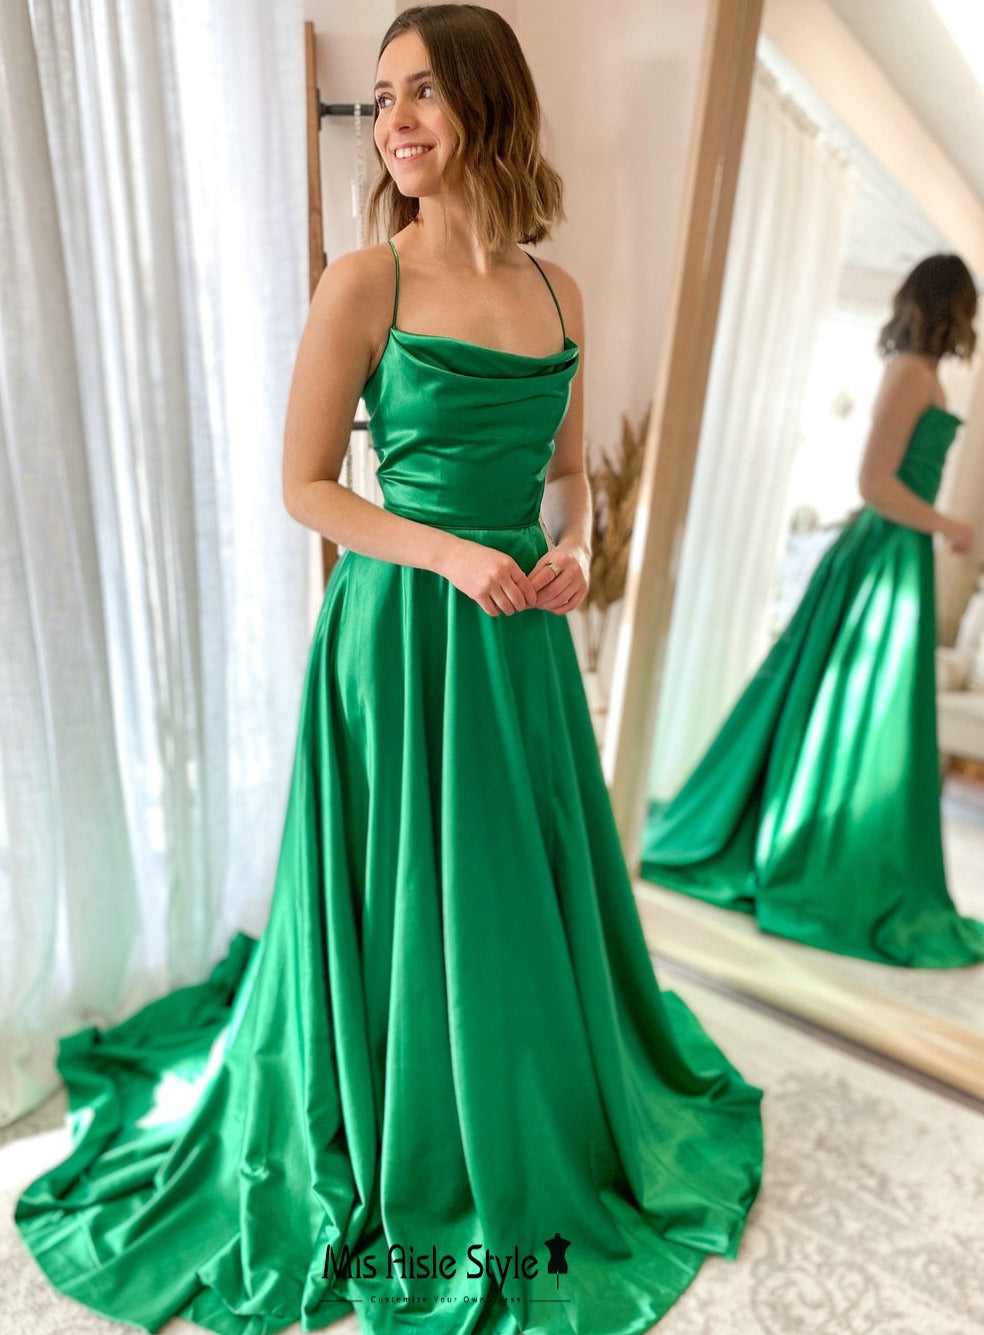 Simple Square Neckline Green Prom Dress – misaislestyle